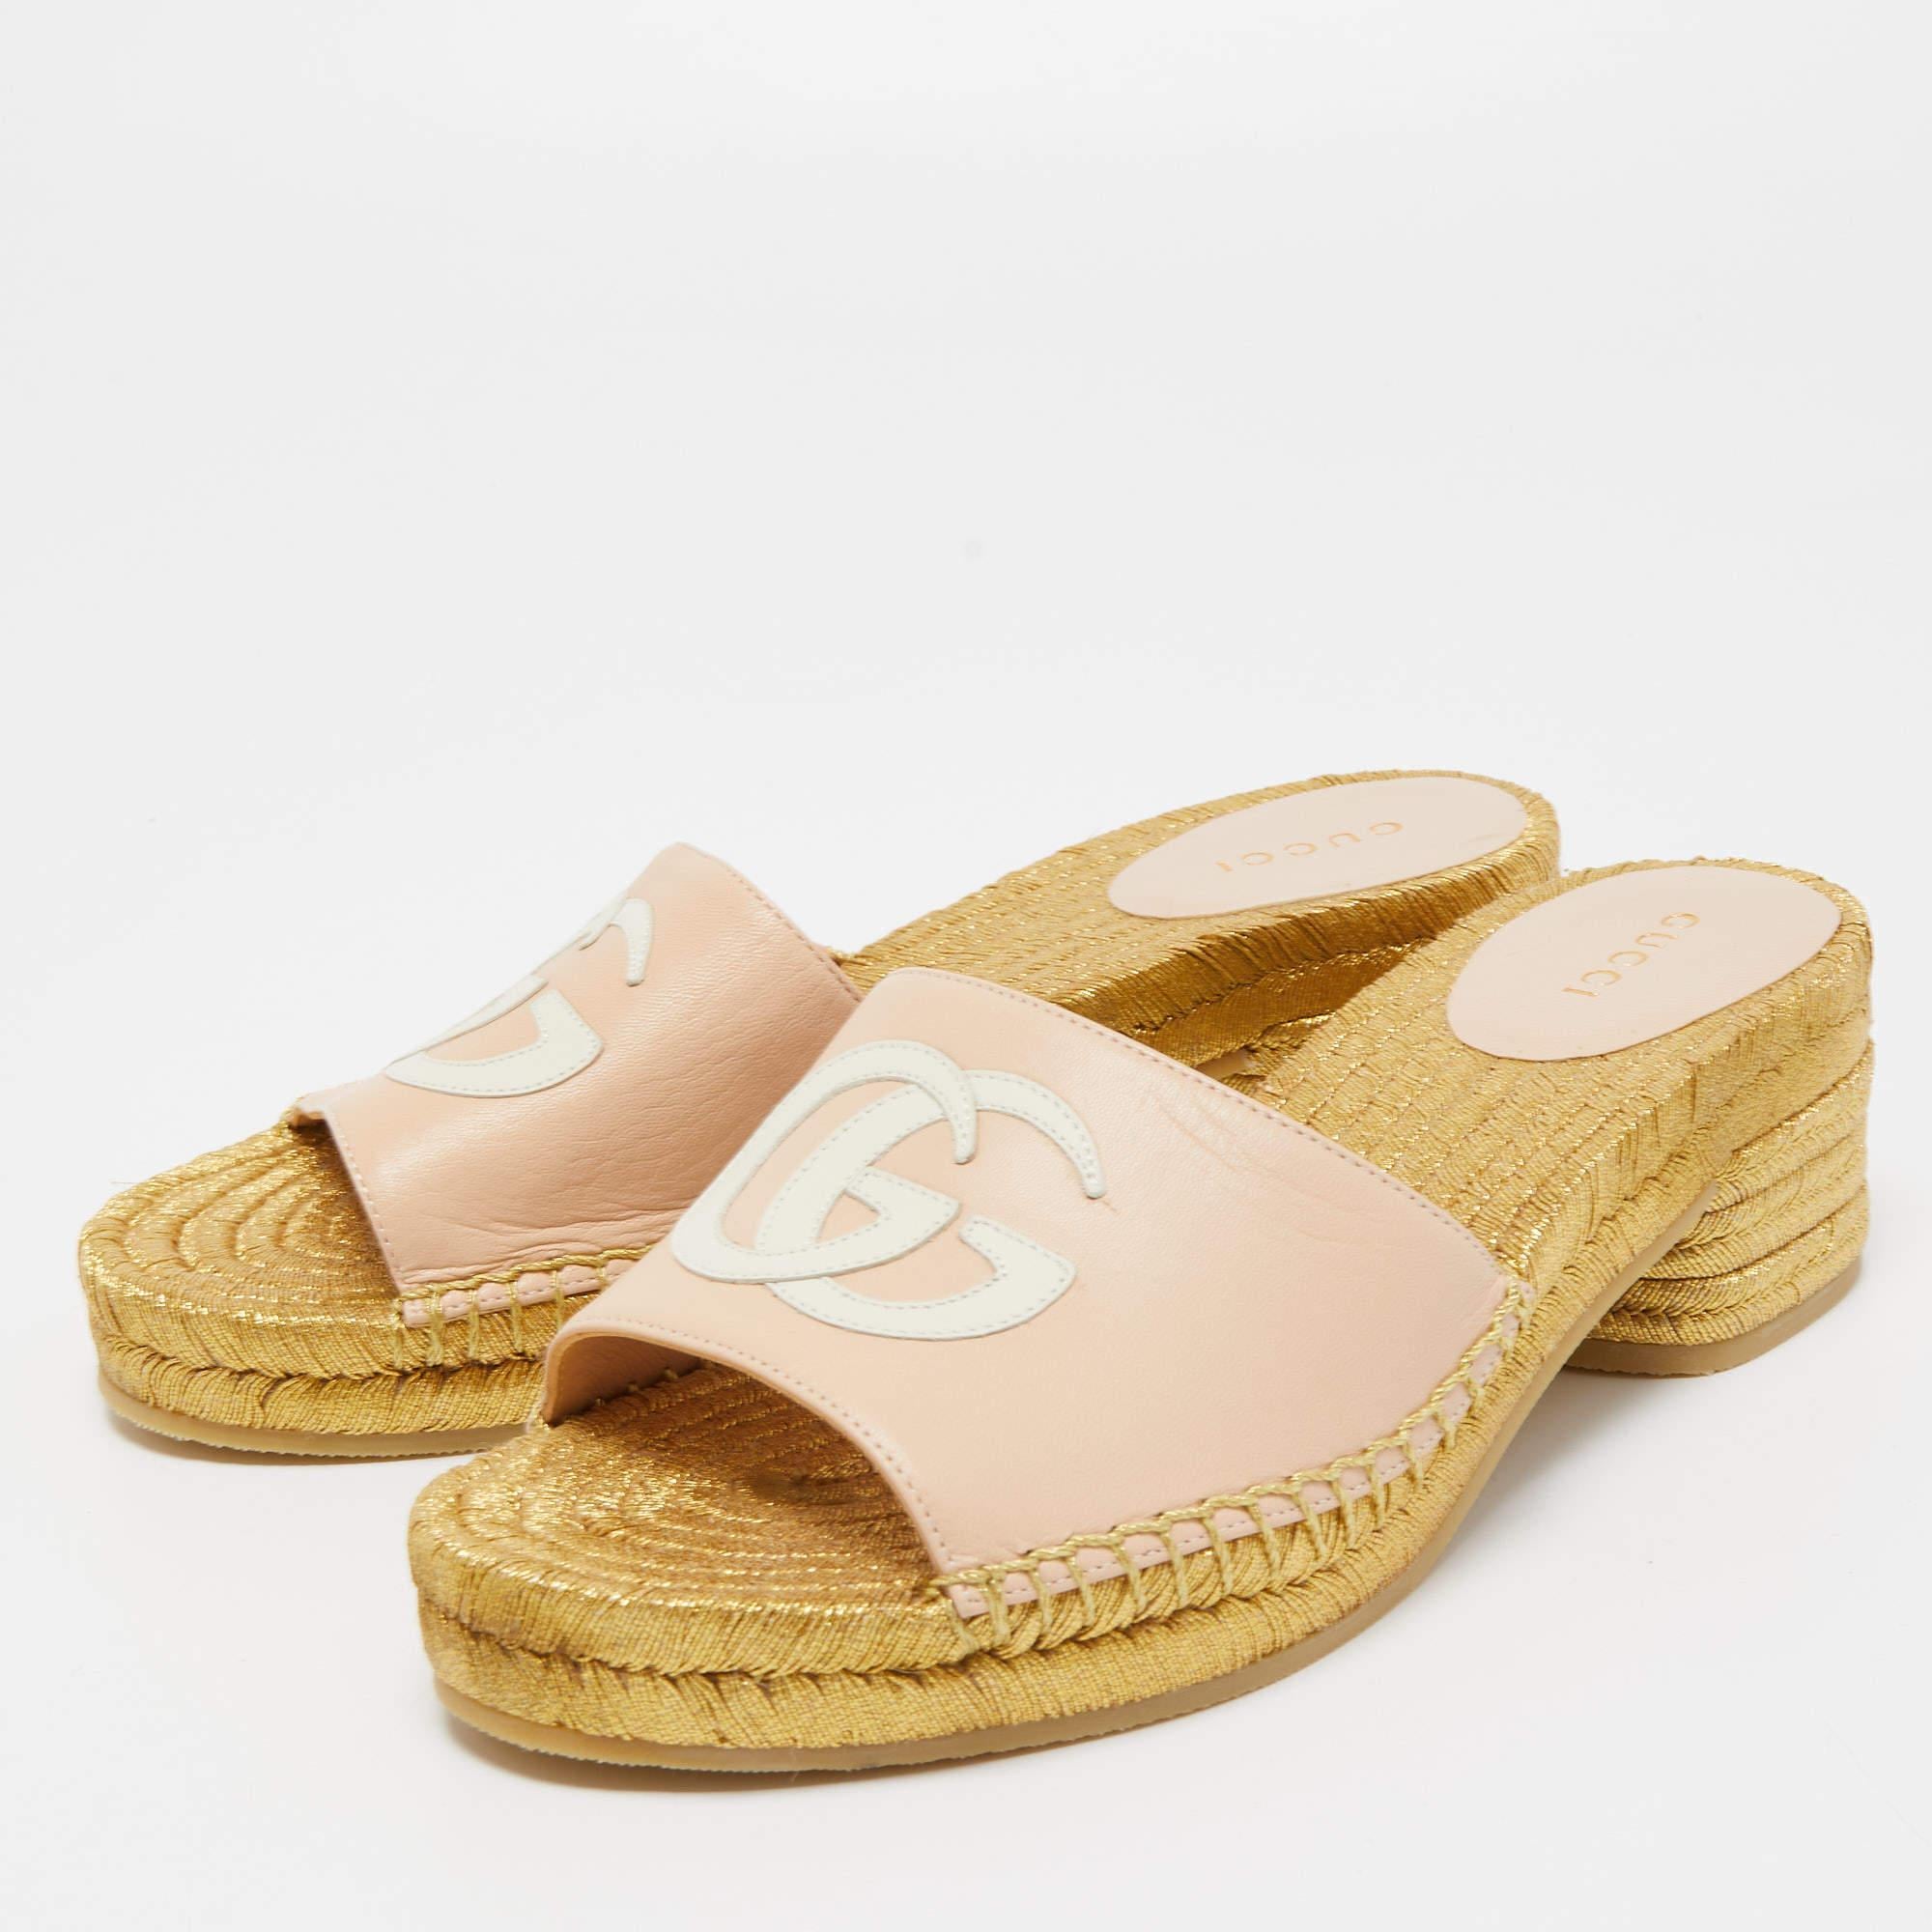 These Gucci espadrilles exude cool summer vibes while giving all the comfort to your feet. They bring along a well-built silhouette and the house's signature aesthetics. Wear them with anything: jeans, dresses, shorts.

Includes: Original Dustbag